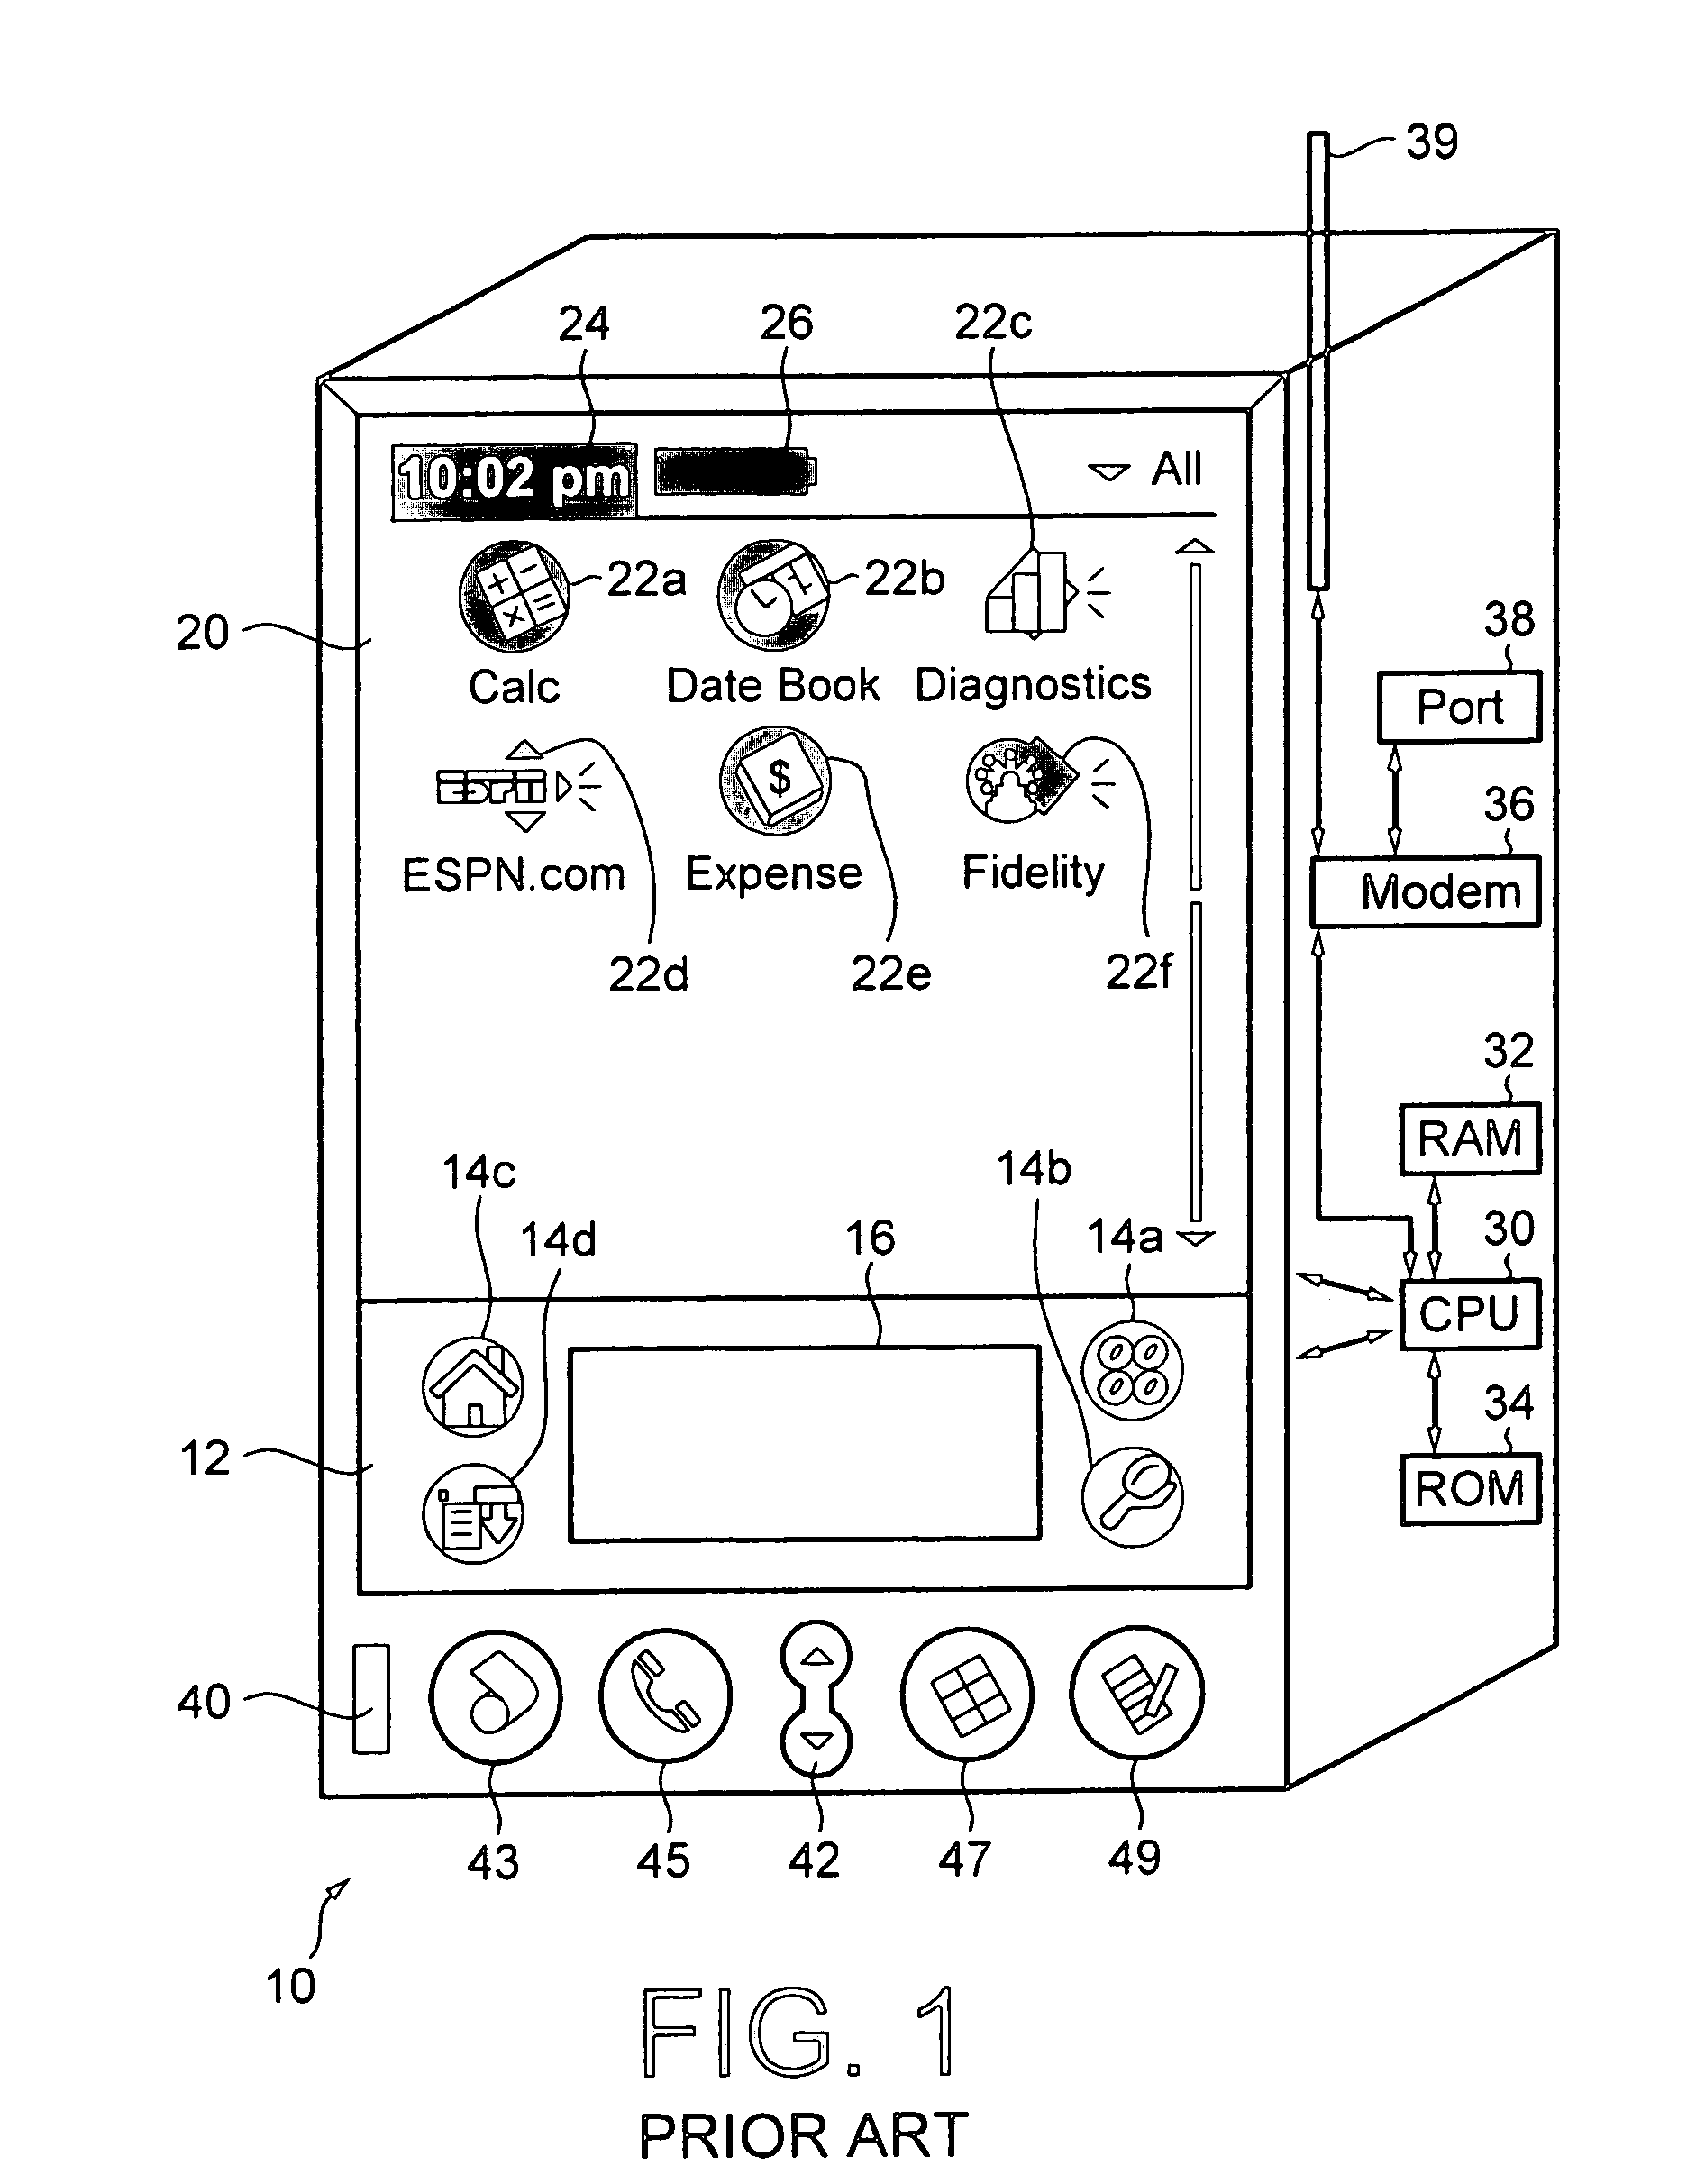 Computer device, method and article of manufacture for utilizing sequenced symbols to enable programmed application and commands